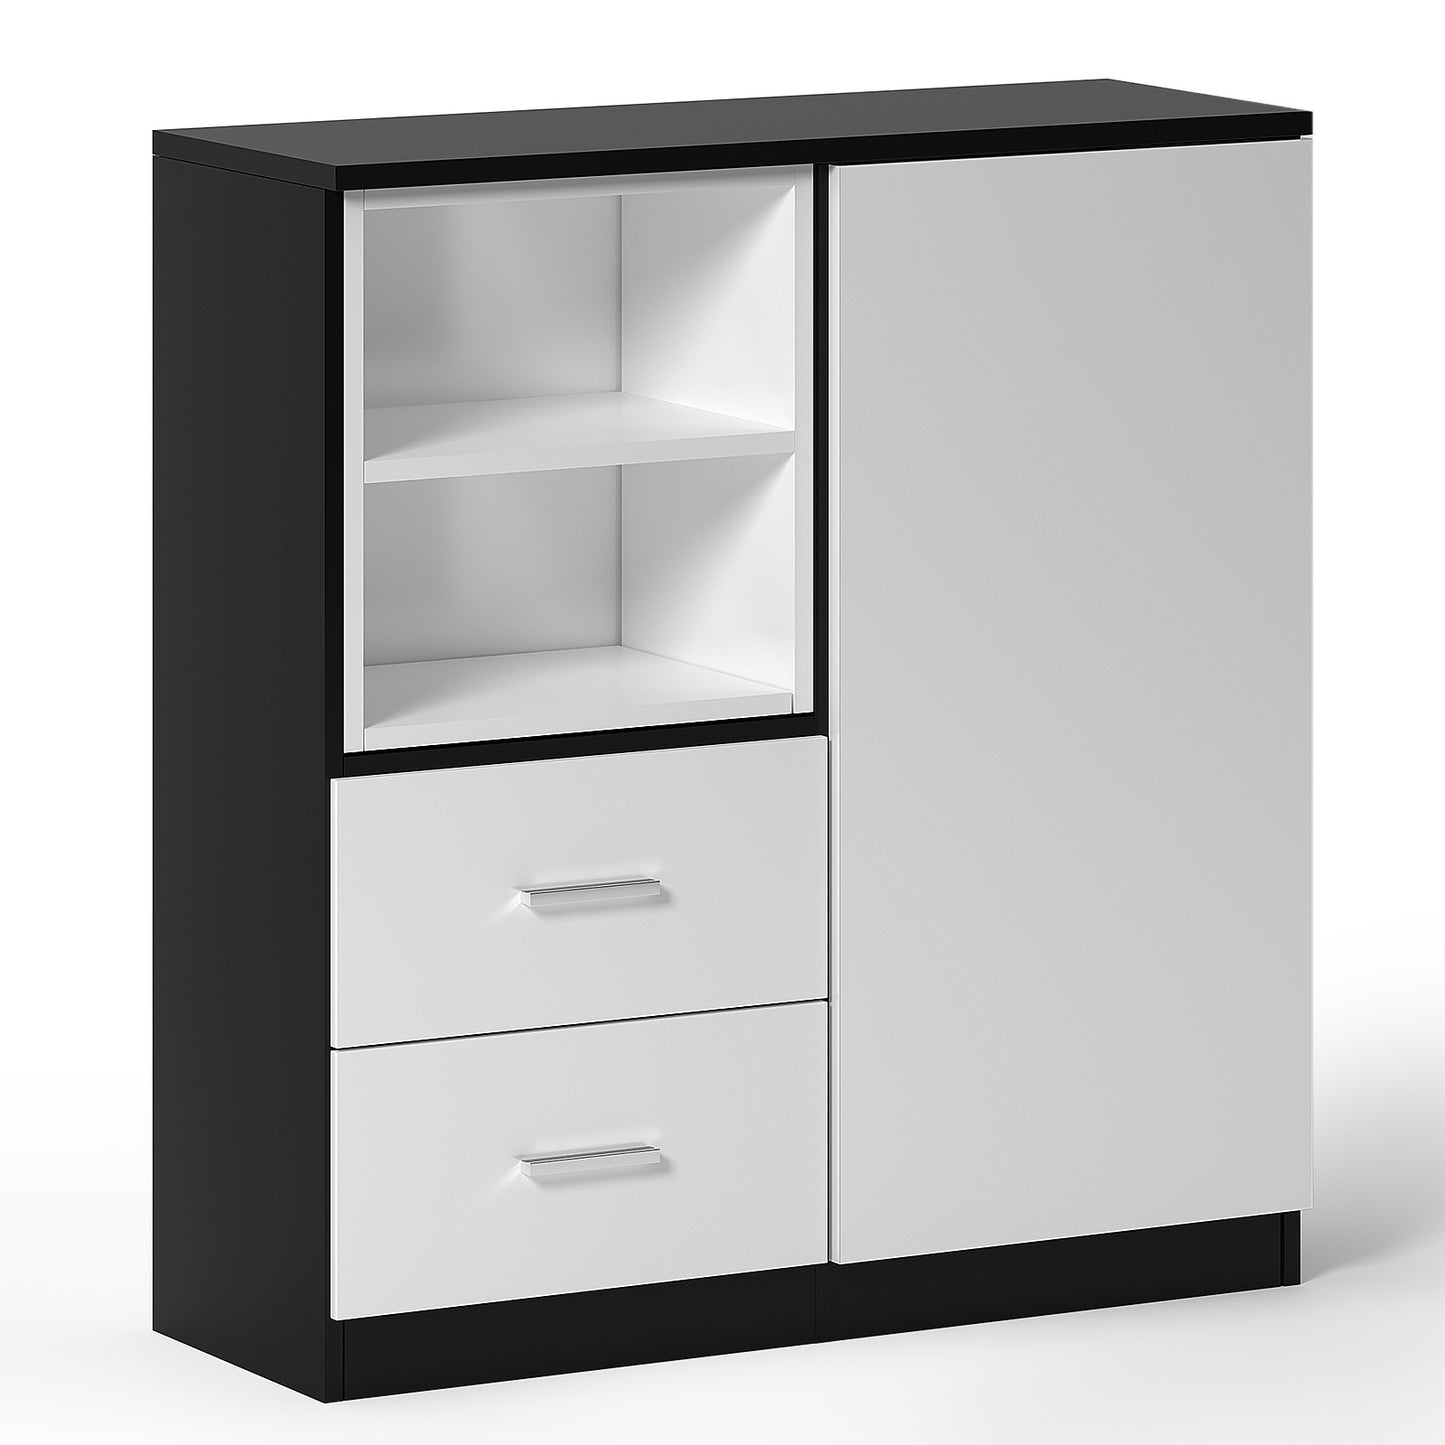 Soges Modern Minimalist Design of Lockable Lockers and File Cabinets with Durable Moving Wheels for Office, Study